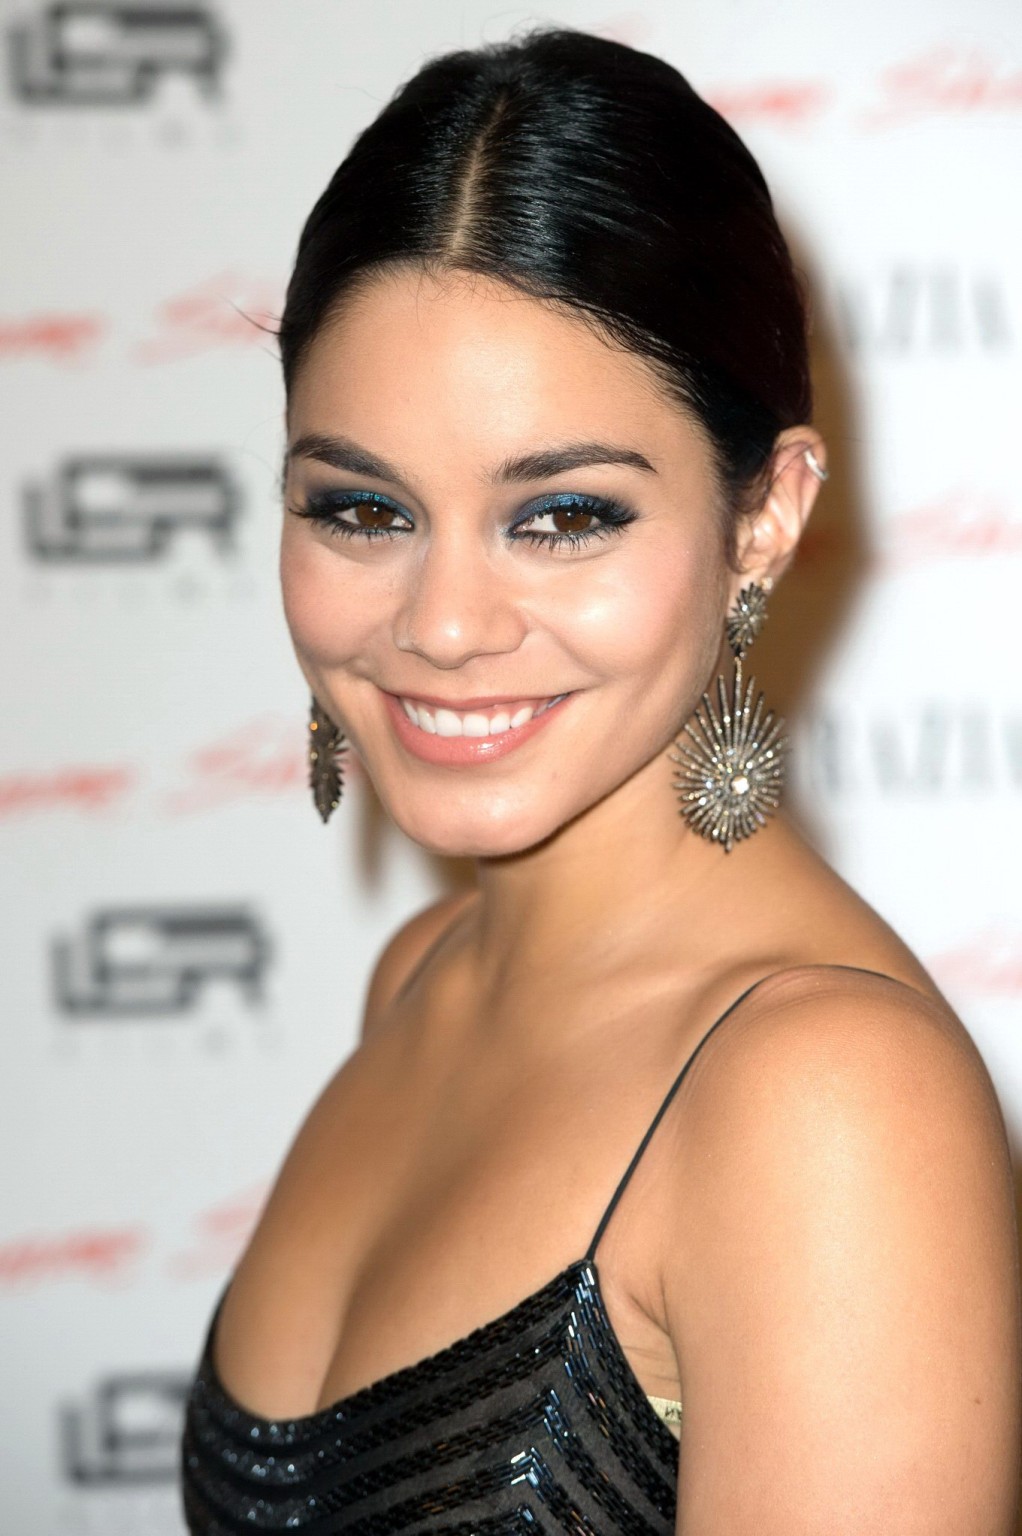 Vanessa Hudgens braless wearing a low cut maxi dress at Gimme Shelter premiere i #75182595